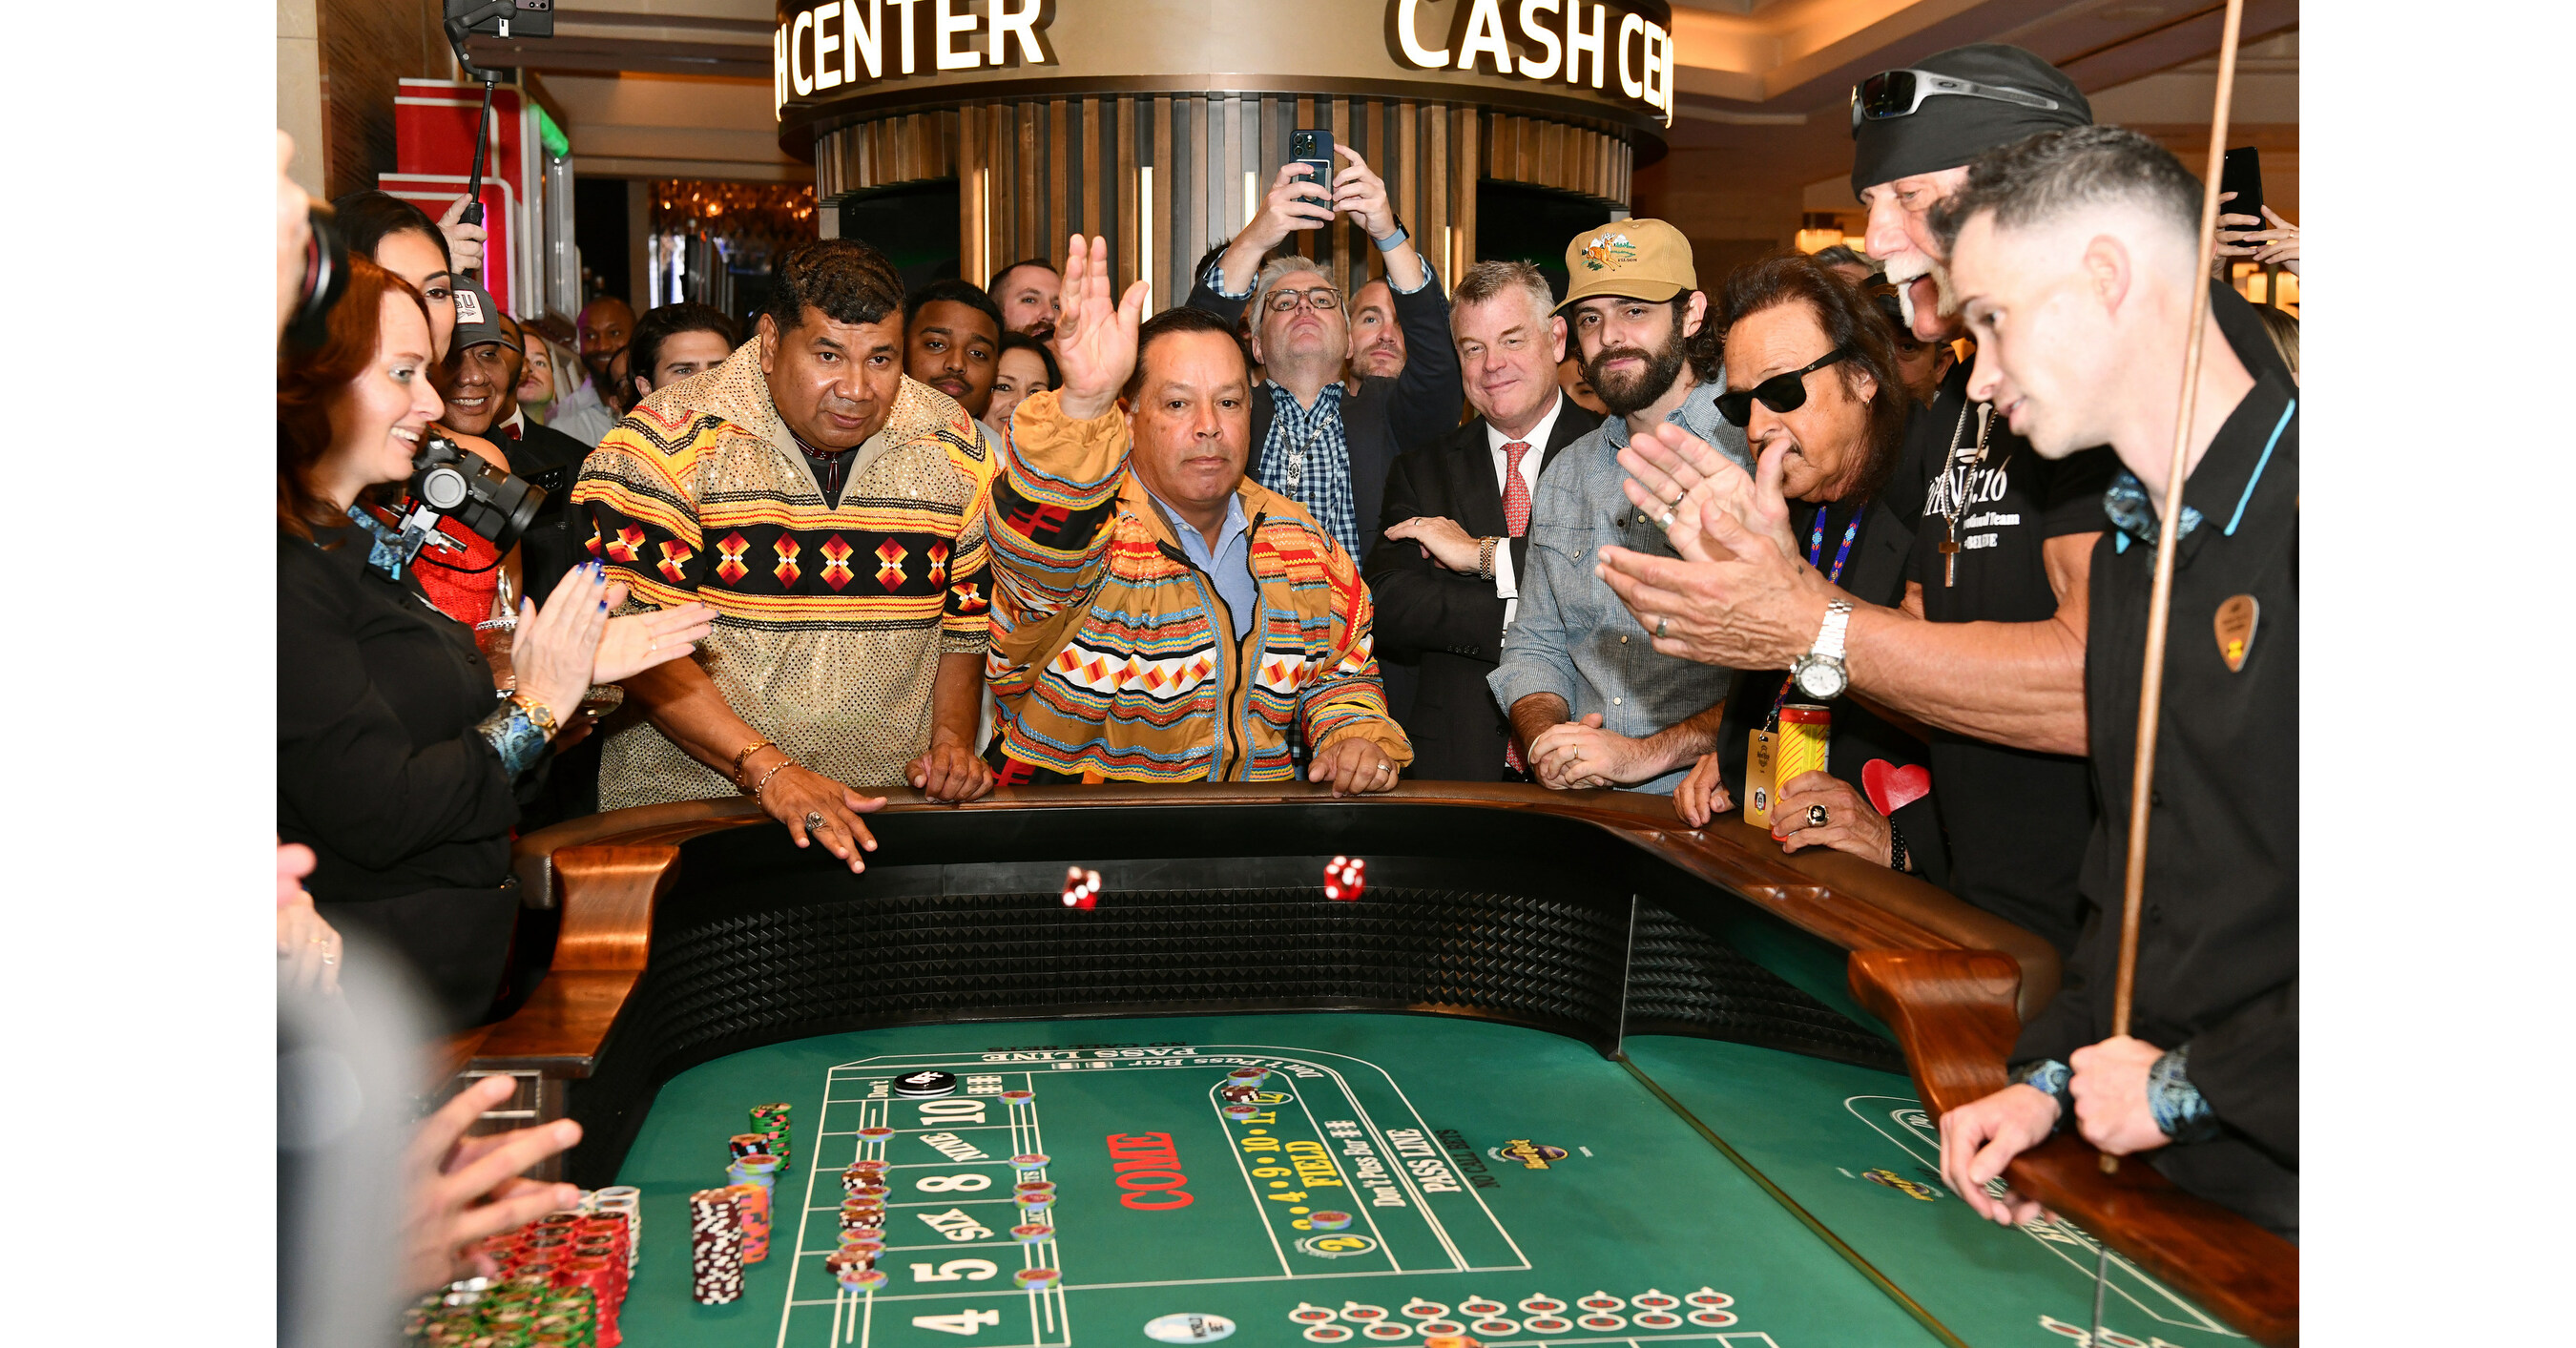 Sports betting, craps and roulette debut at Seminole casinos